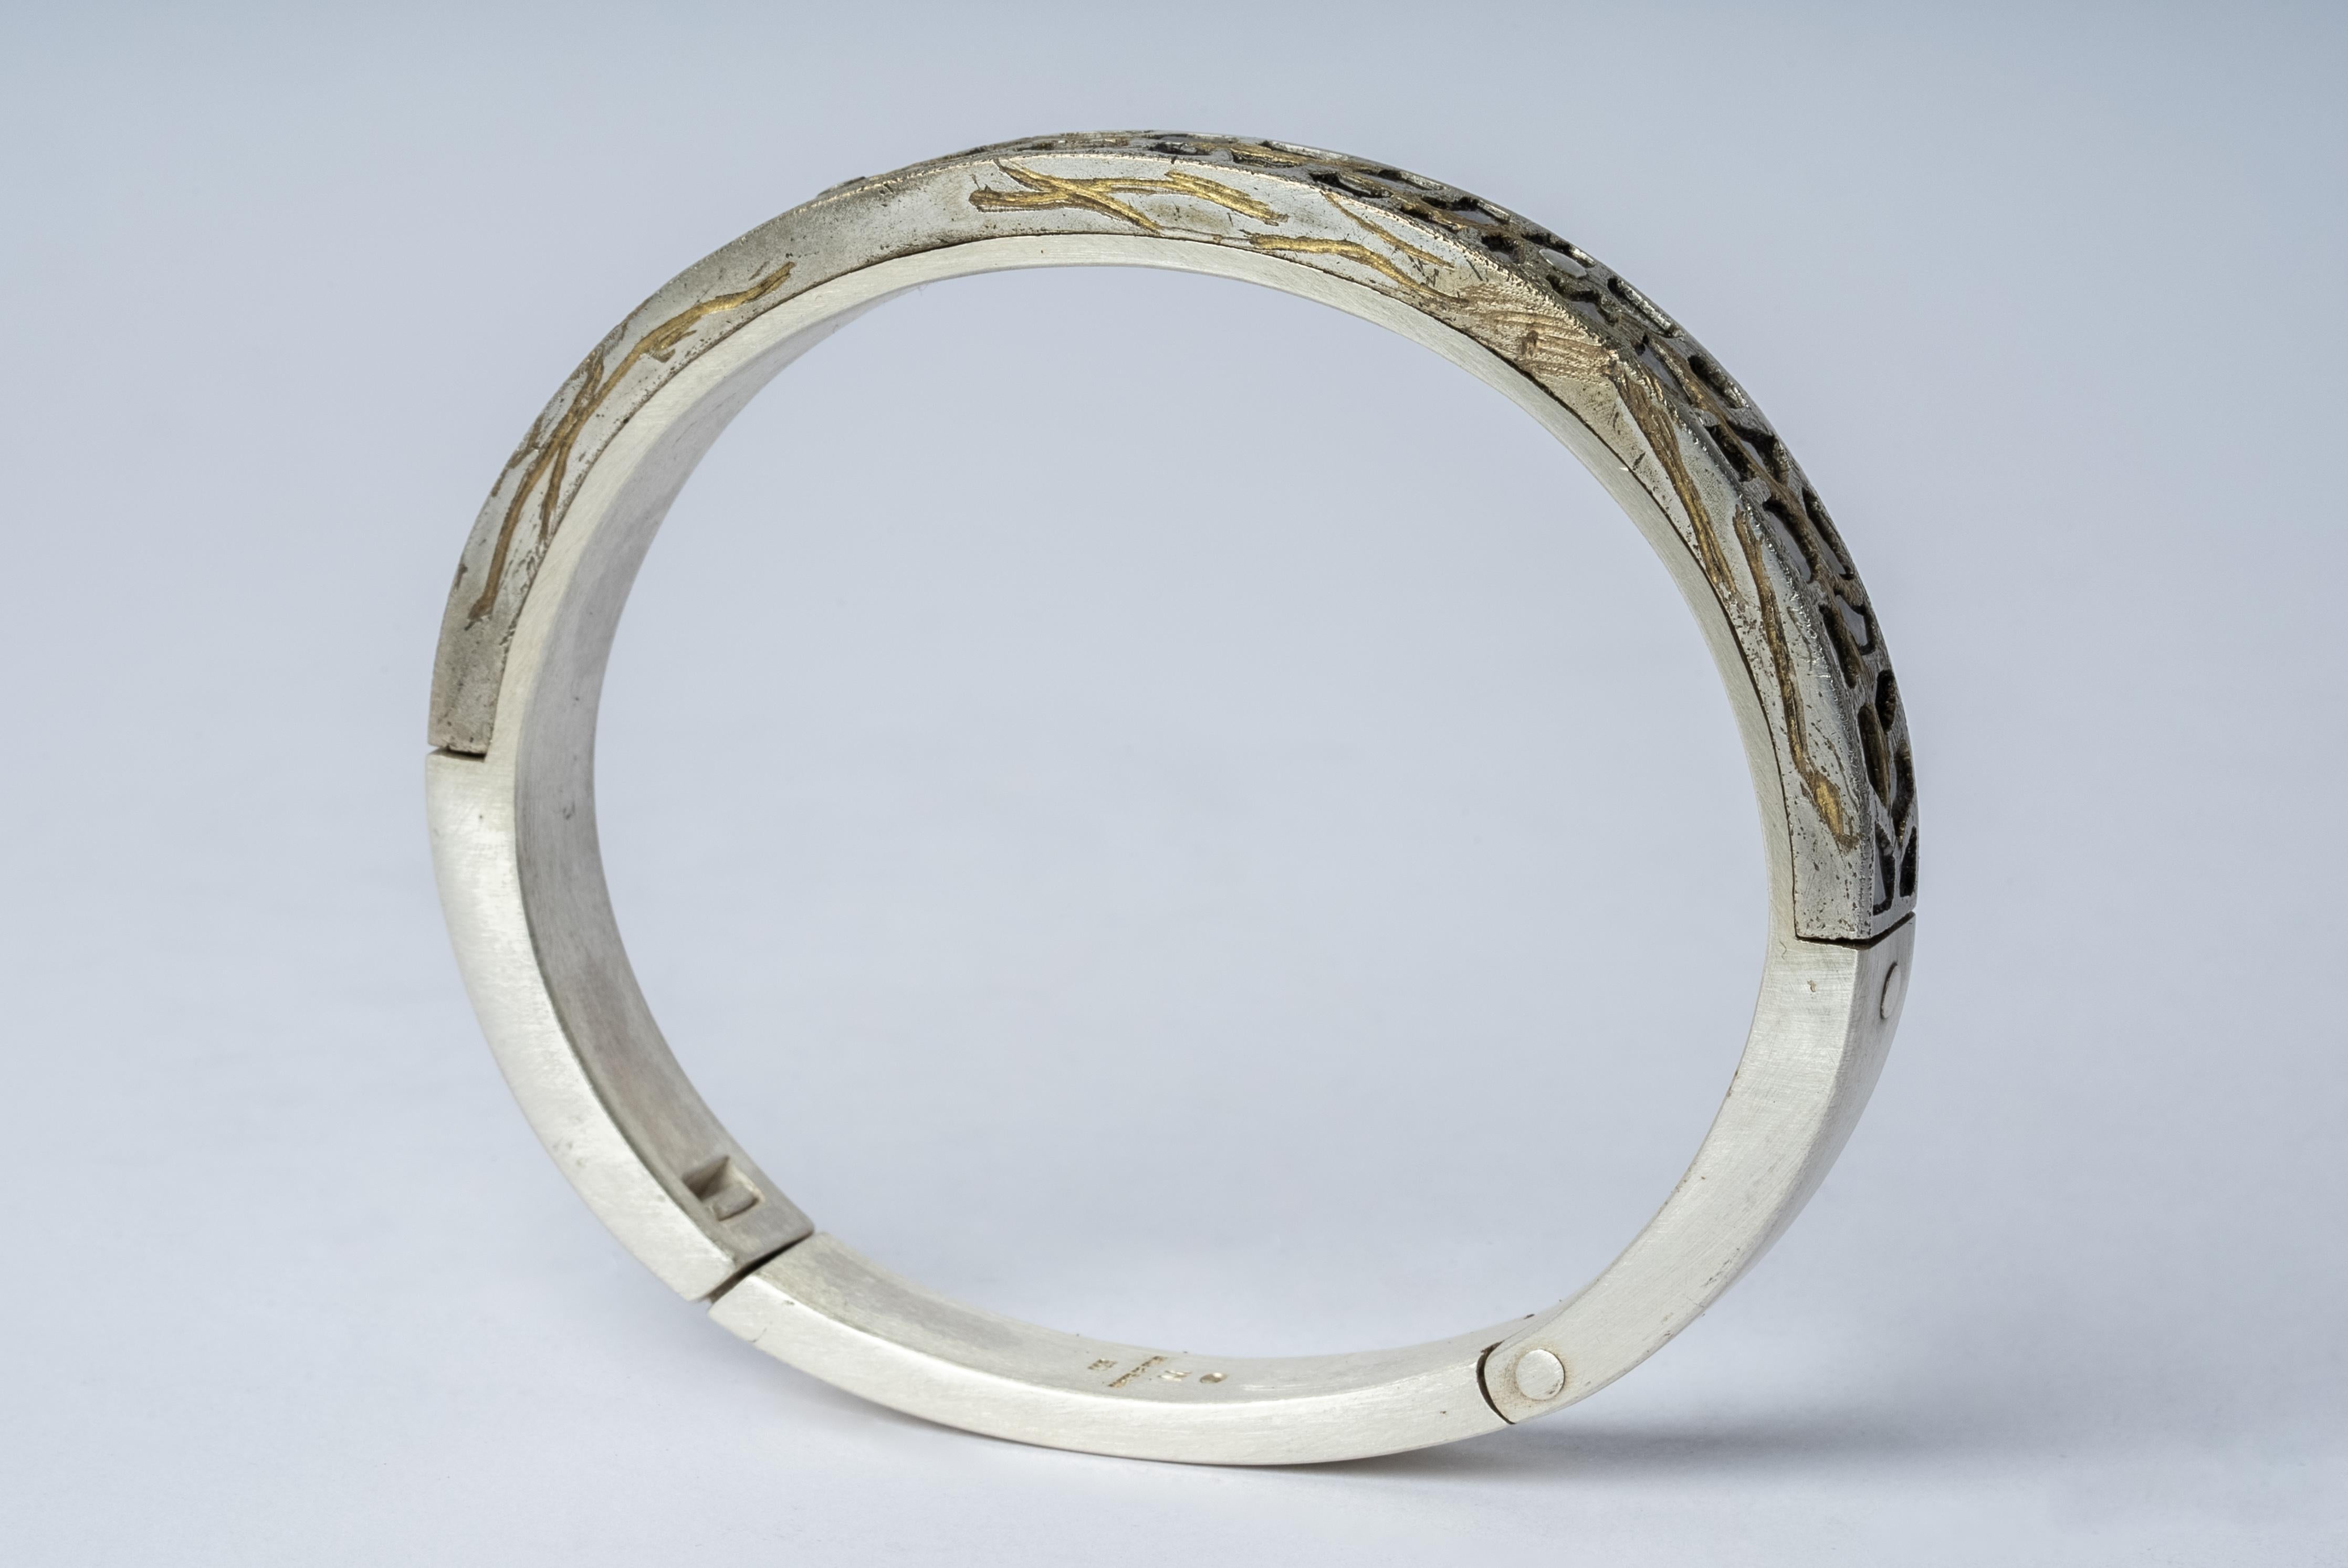 Bracelet in sterling silver, burned gold plated brass and slabs of rough diamond set in mega pave setting. These slabs are removed from a larger chunk of diamond. This item is made with a naturally occurring element and will vary from the photograph